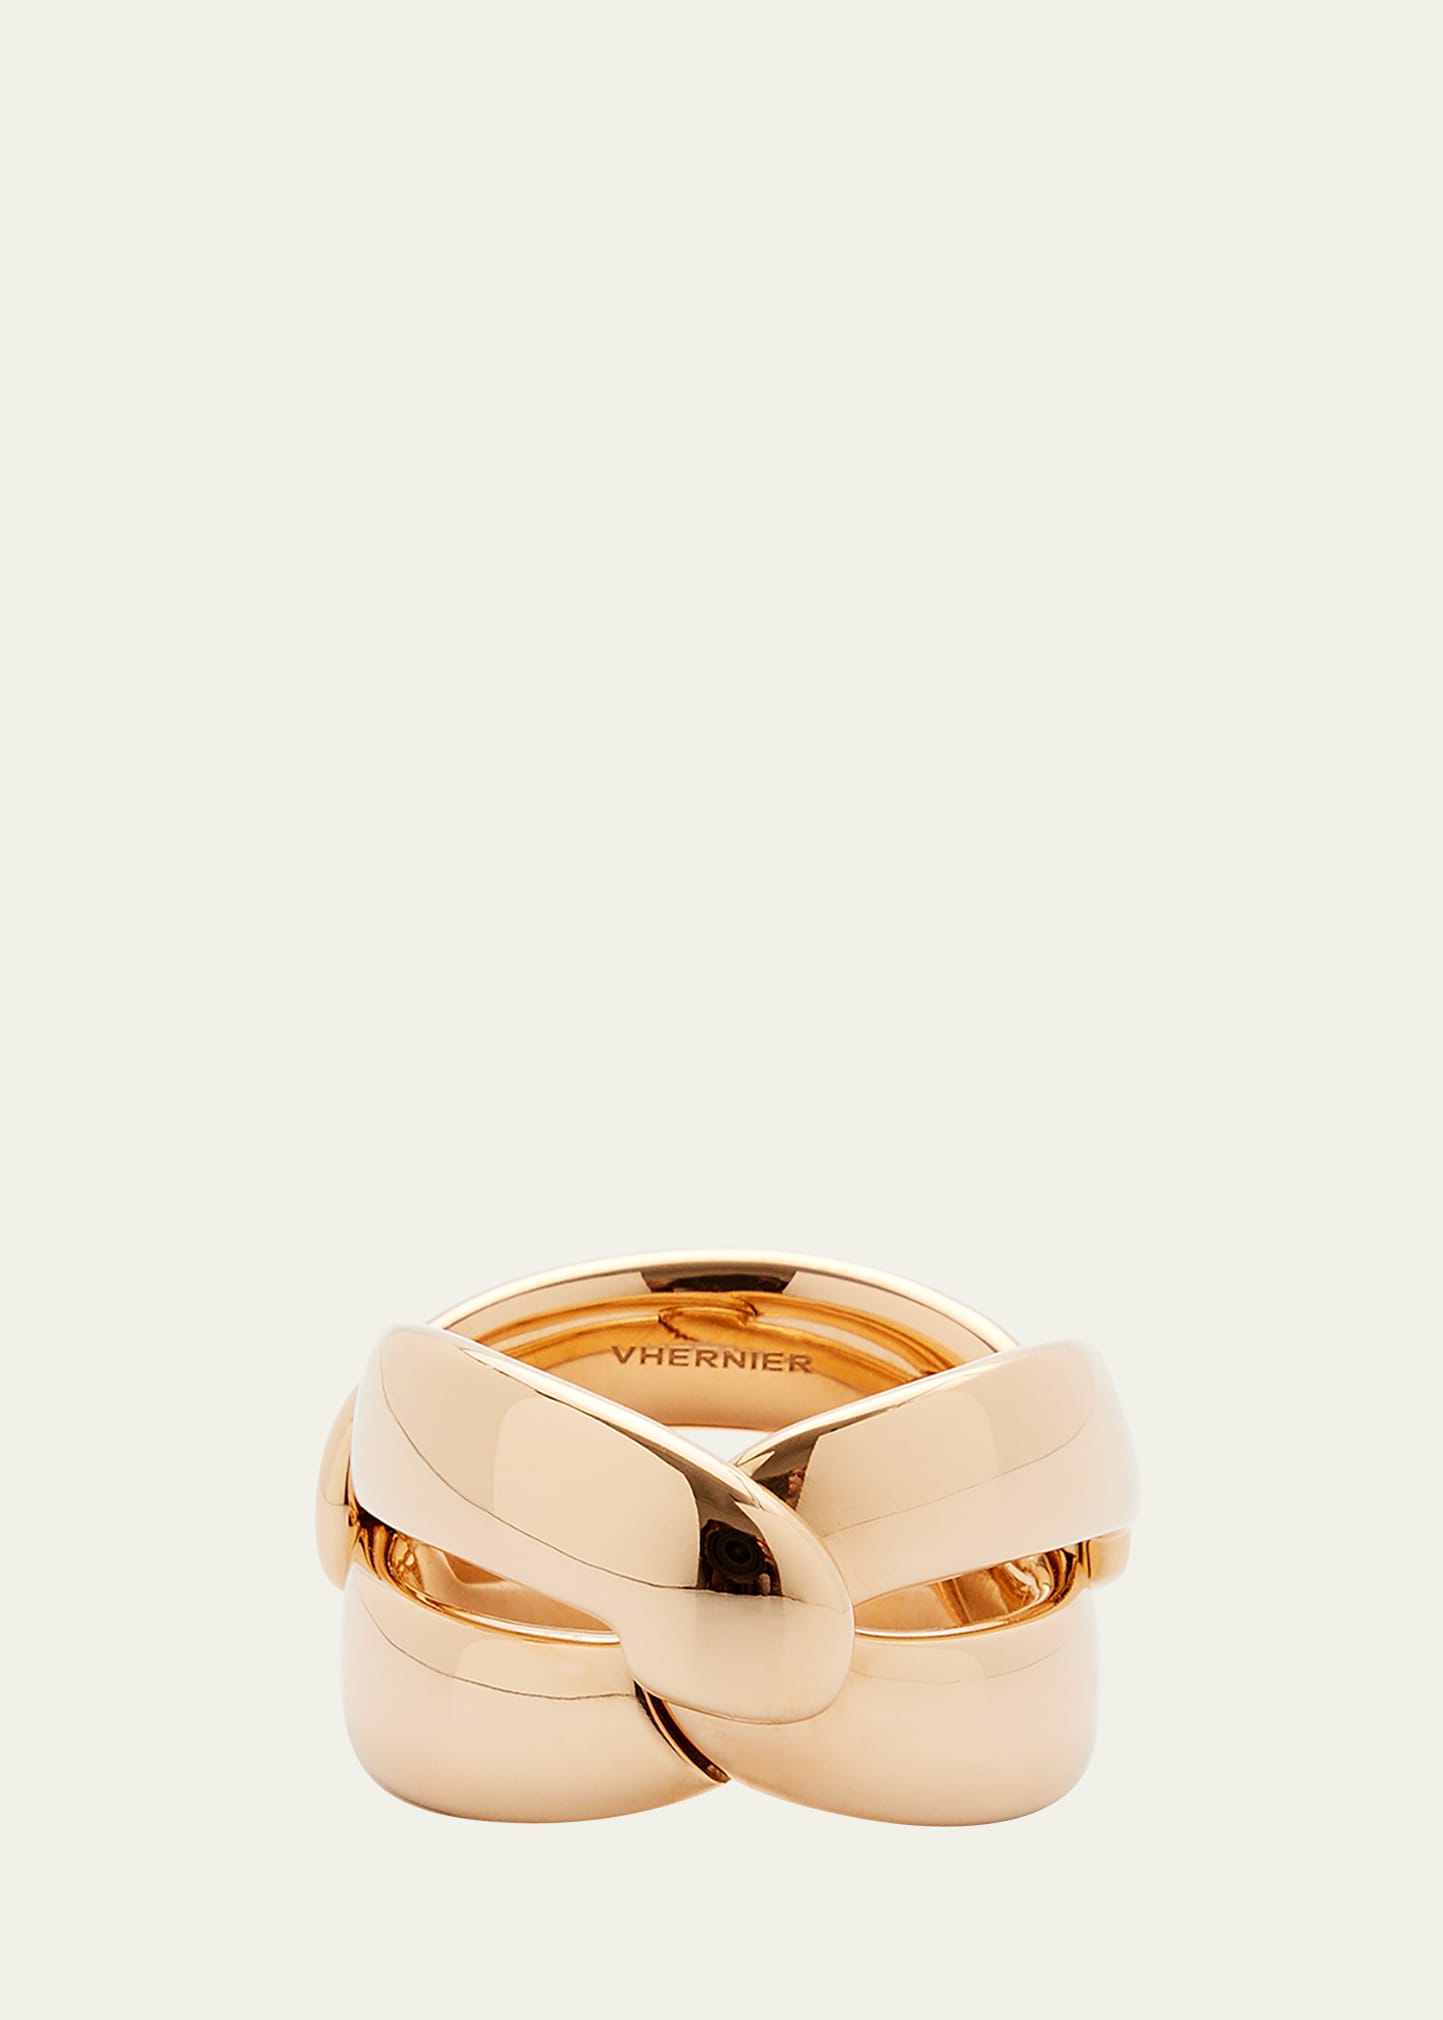 Olympia 18k Pink Gold Ring